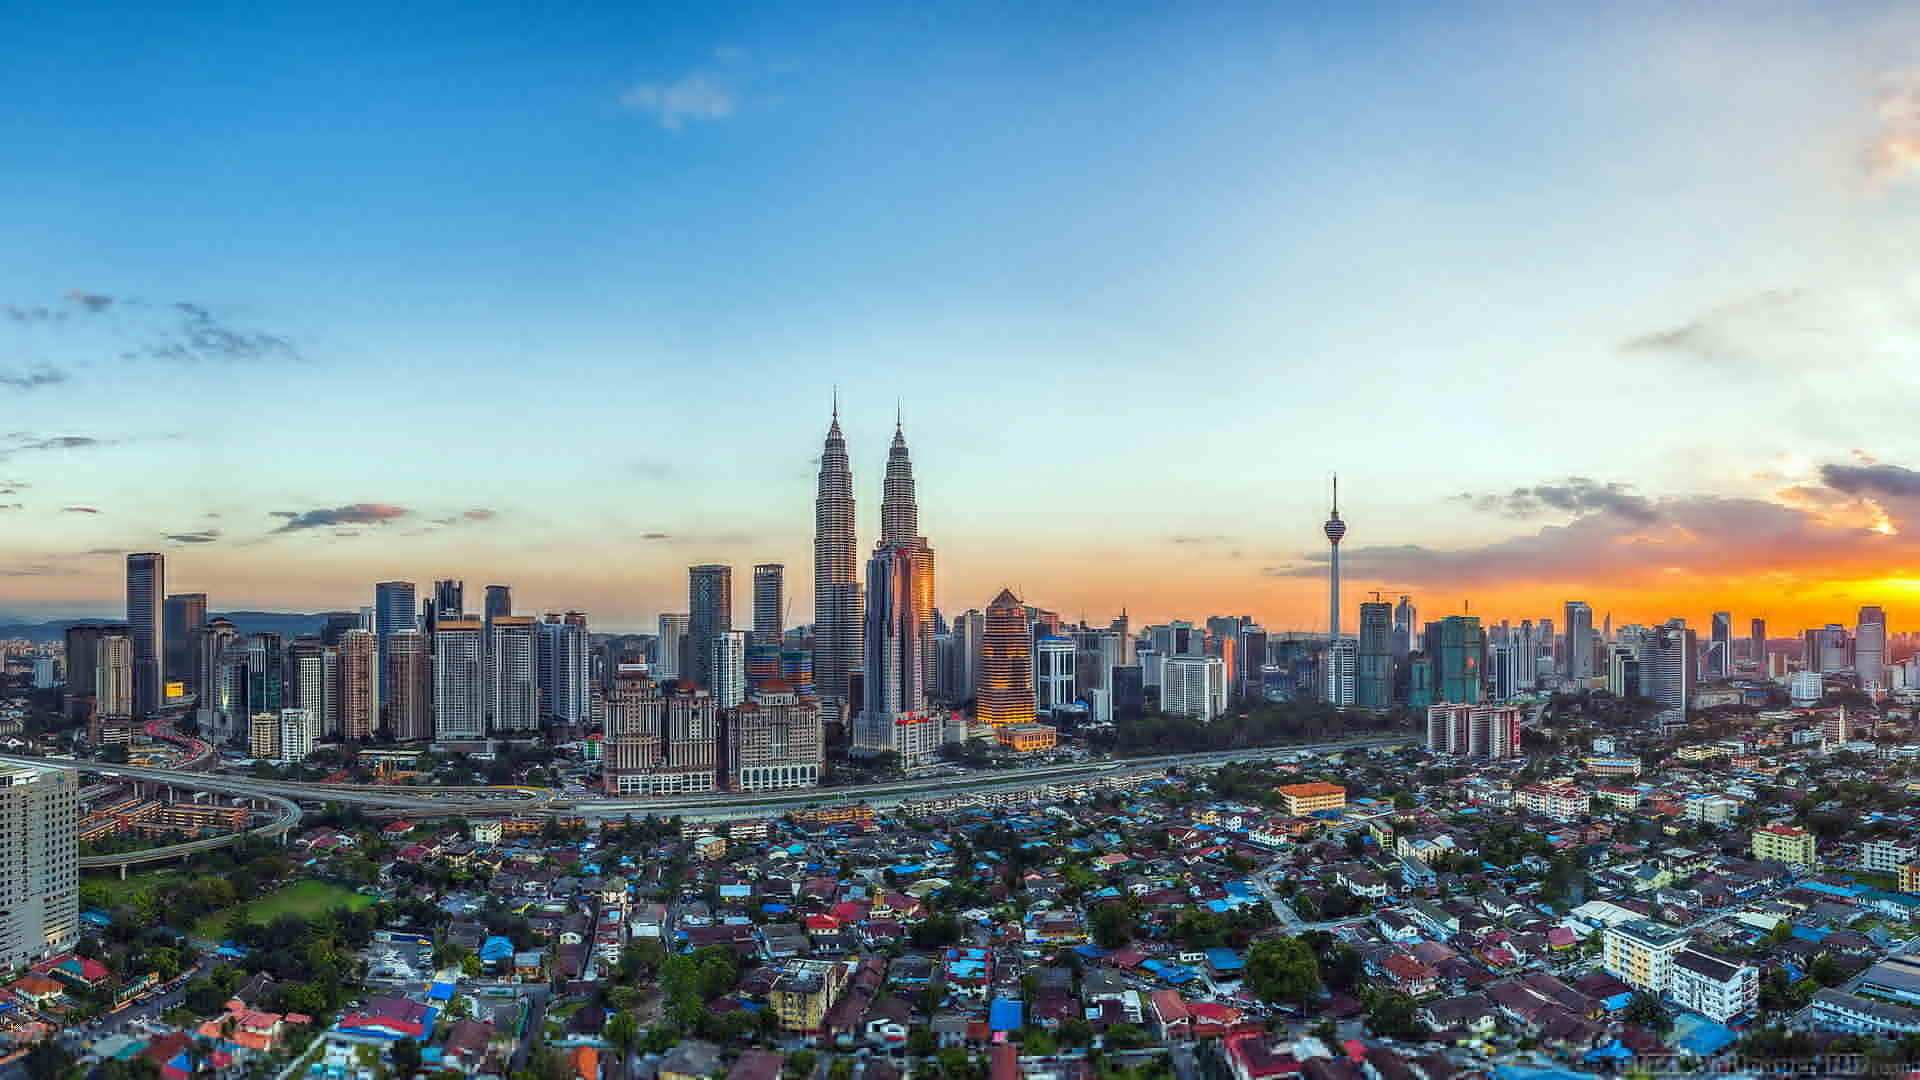 Kuala Lumpur, High-resolution images, Cities of the world, Android wallpaper, 1920x1080 Full HD Desktop